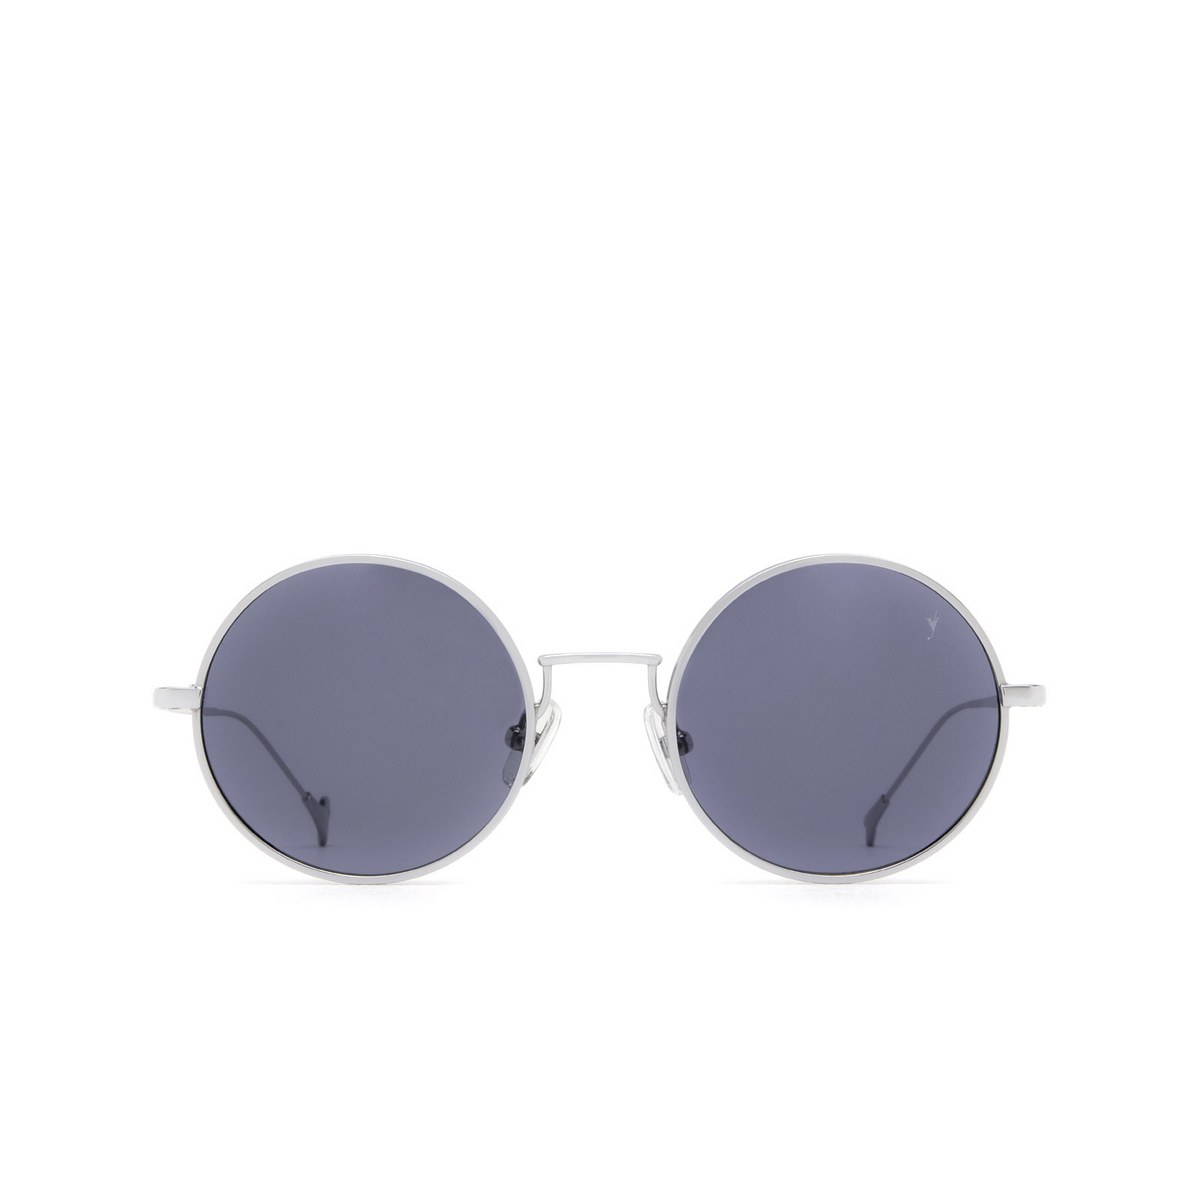 Eyepetizer® Round Sunglasses: William color Silver C.1-39 - front view.